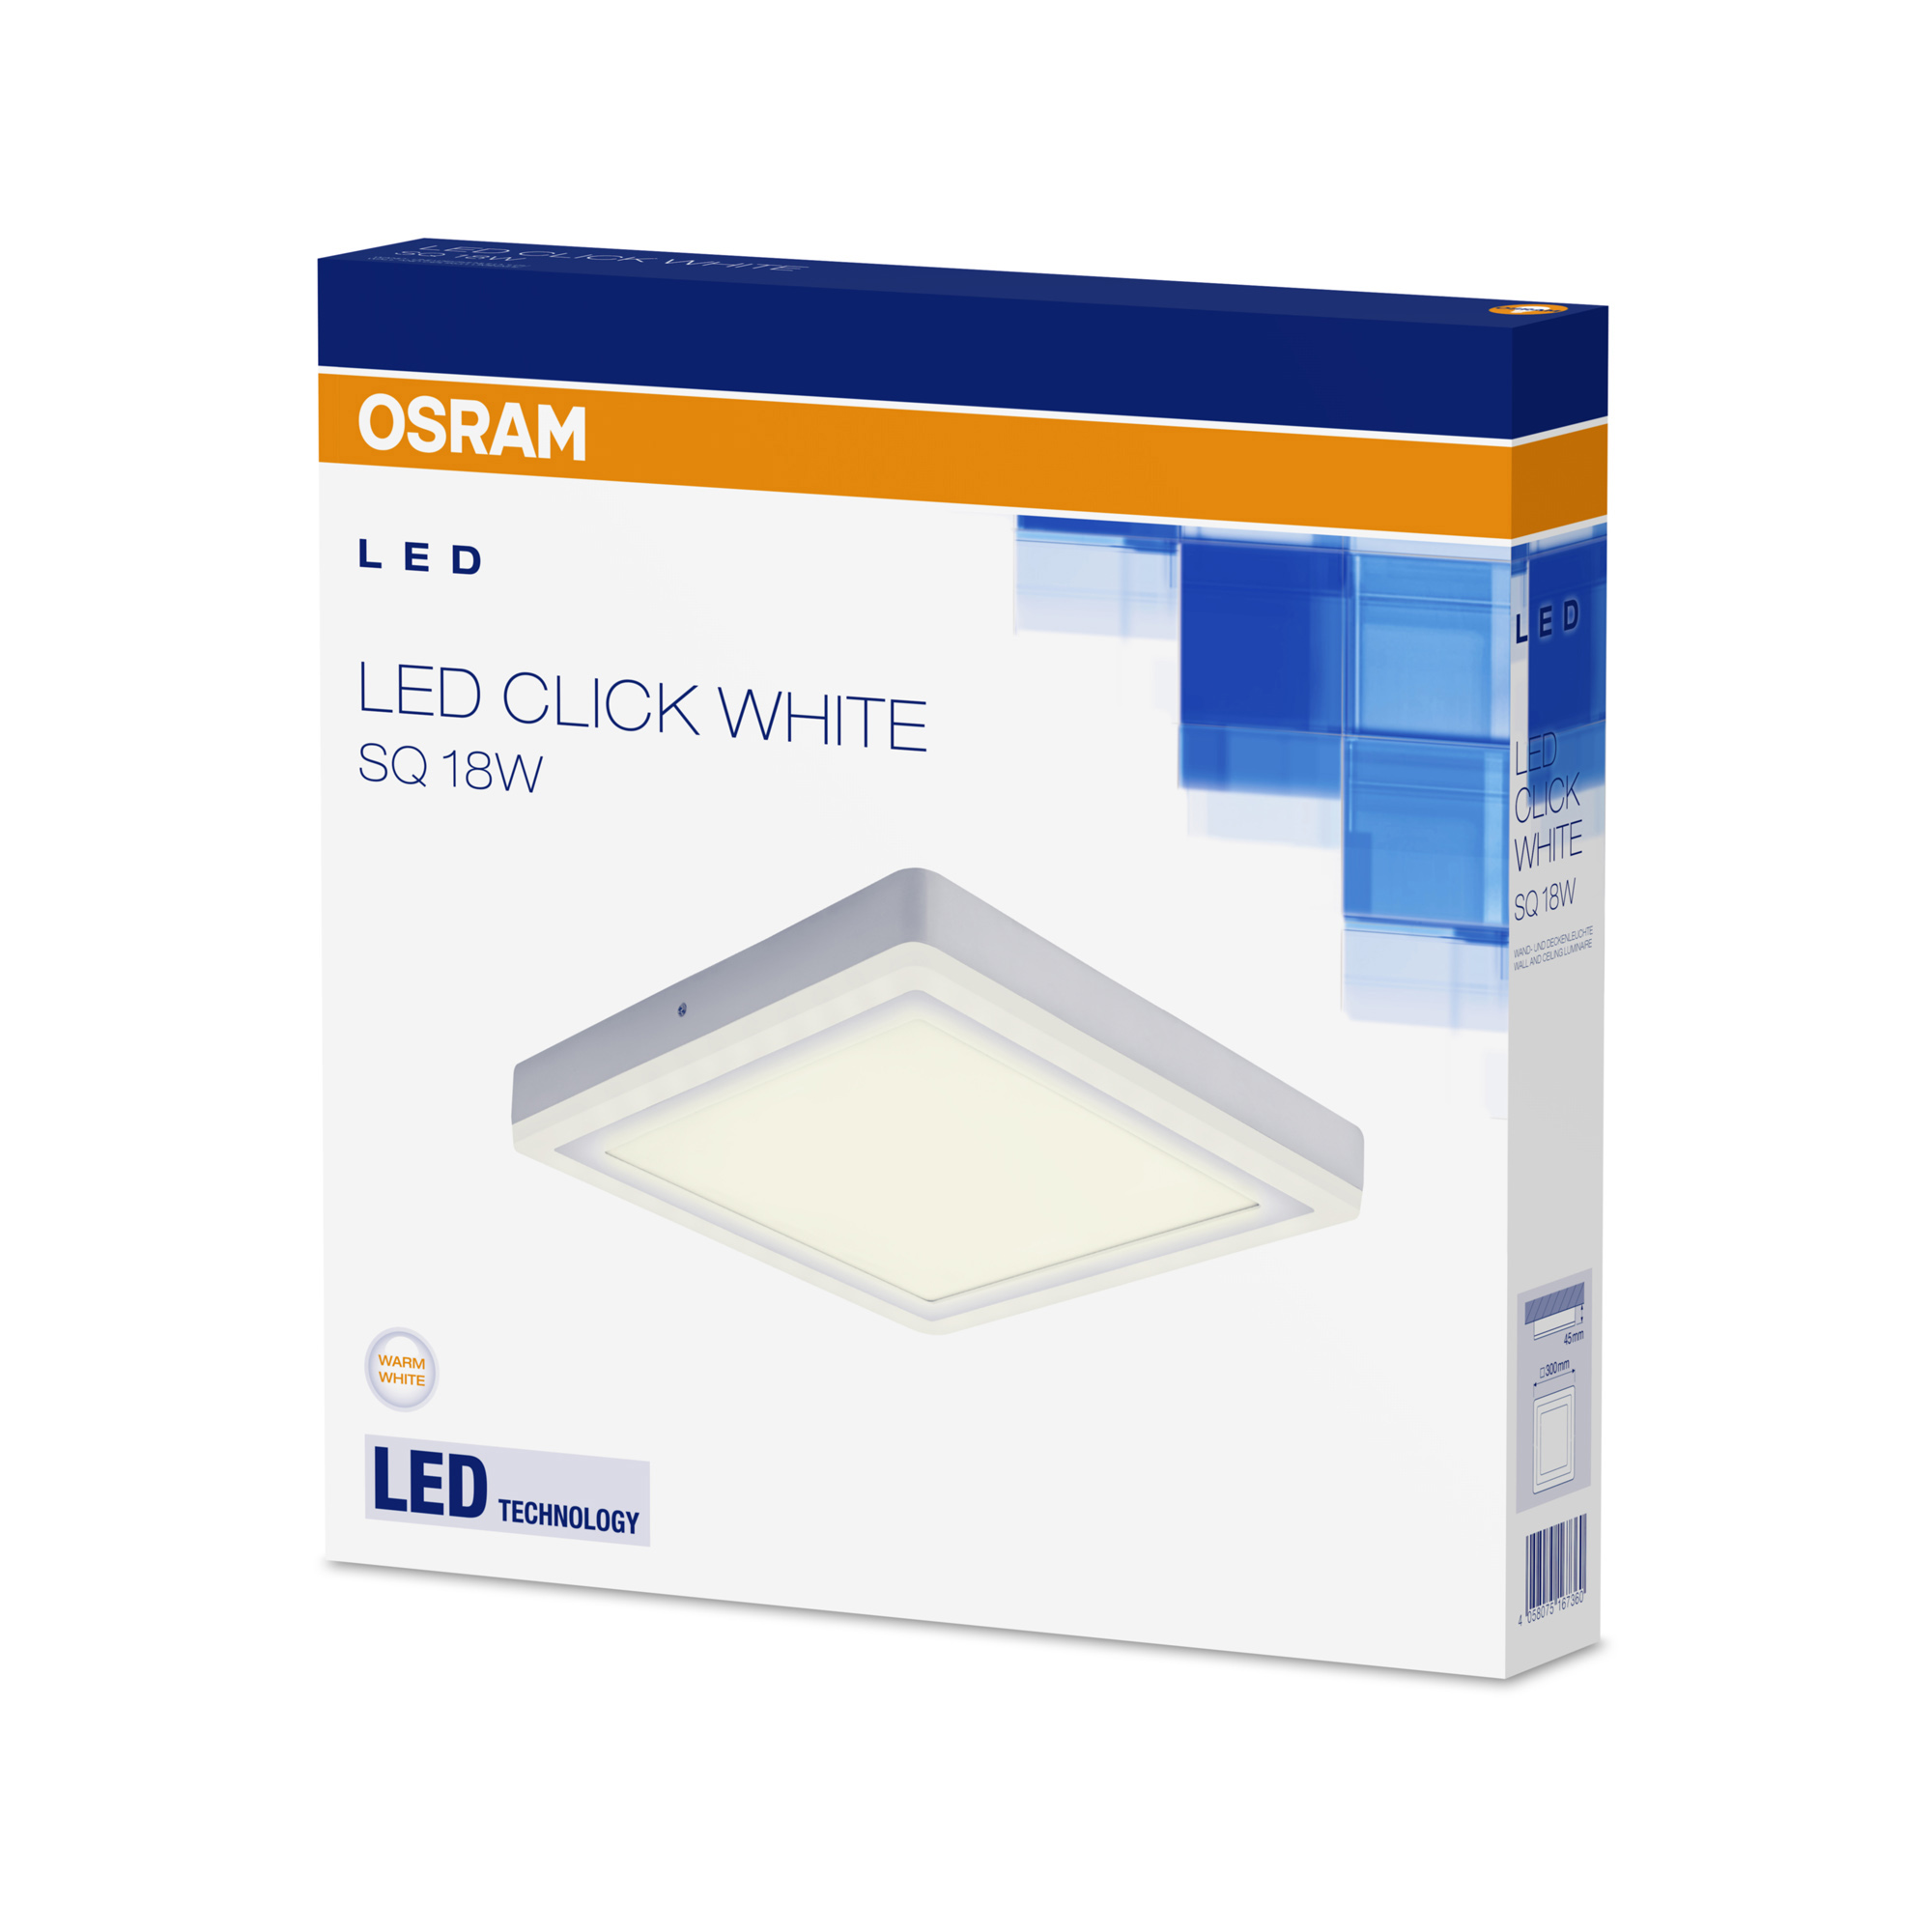 Osram LED CLICK WHITE Square Ceiling and Wall Luminaire 30cm 18W 1100lm 3000K CRI80